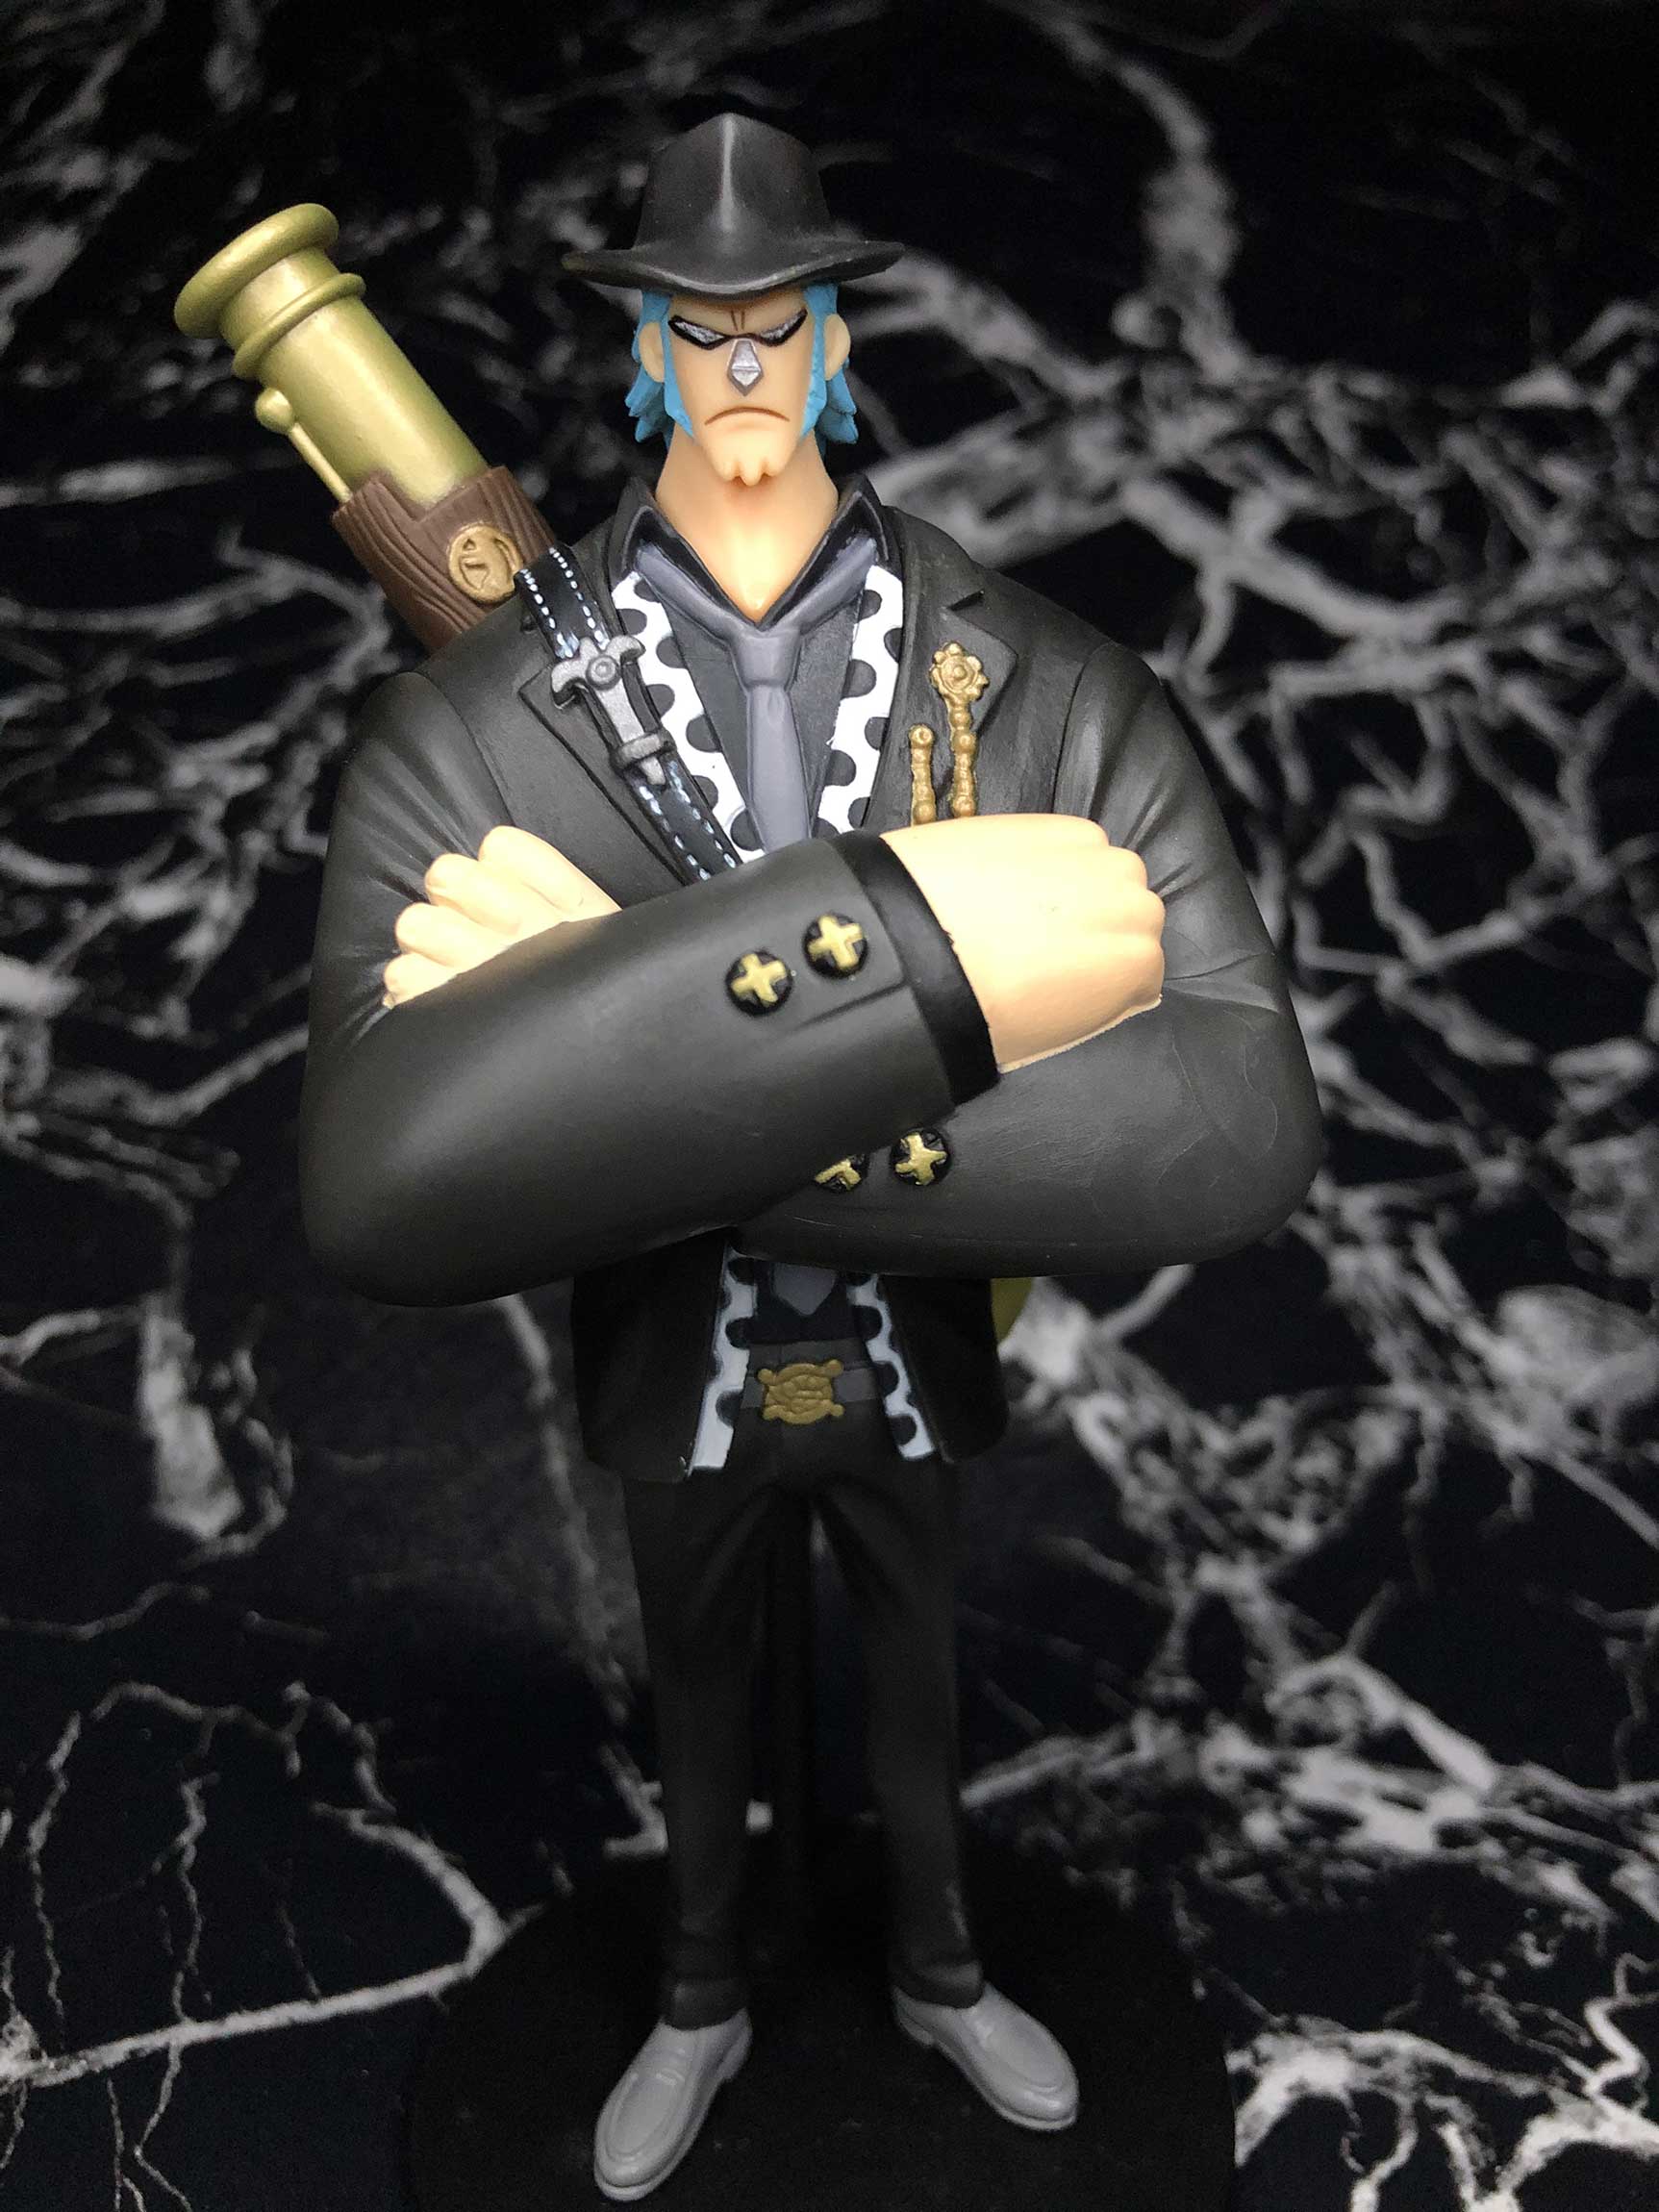 Franky Super Styling Suit & Dress BANDAI | One Piece by Admin at TeamCitadelHobbies